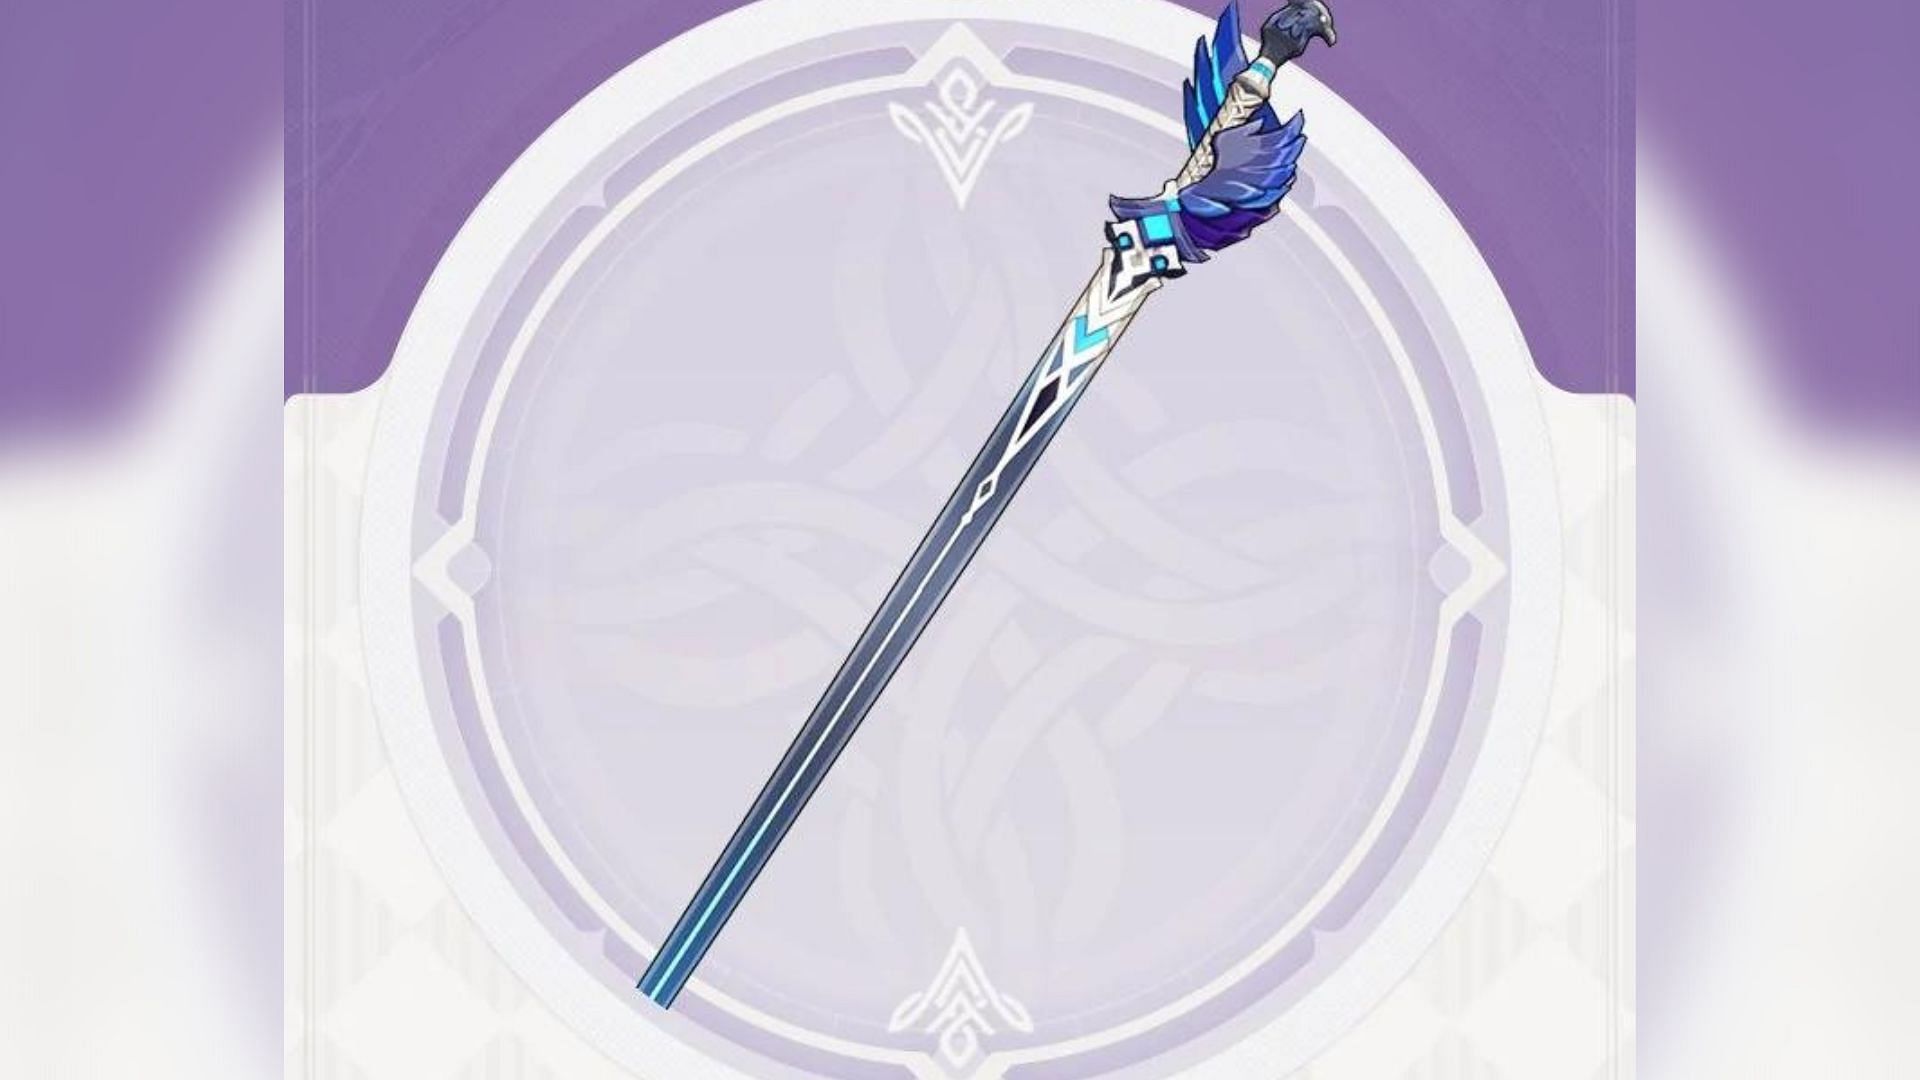 The Alley Flash is a must-have sword for Genshin Impact players (Image via HoYoverse)